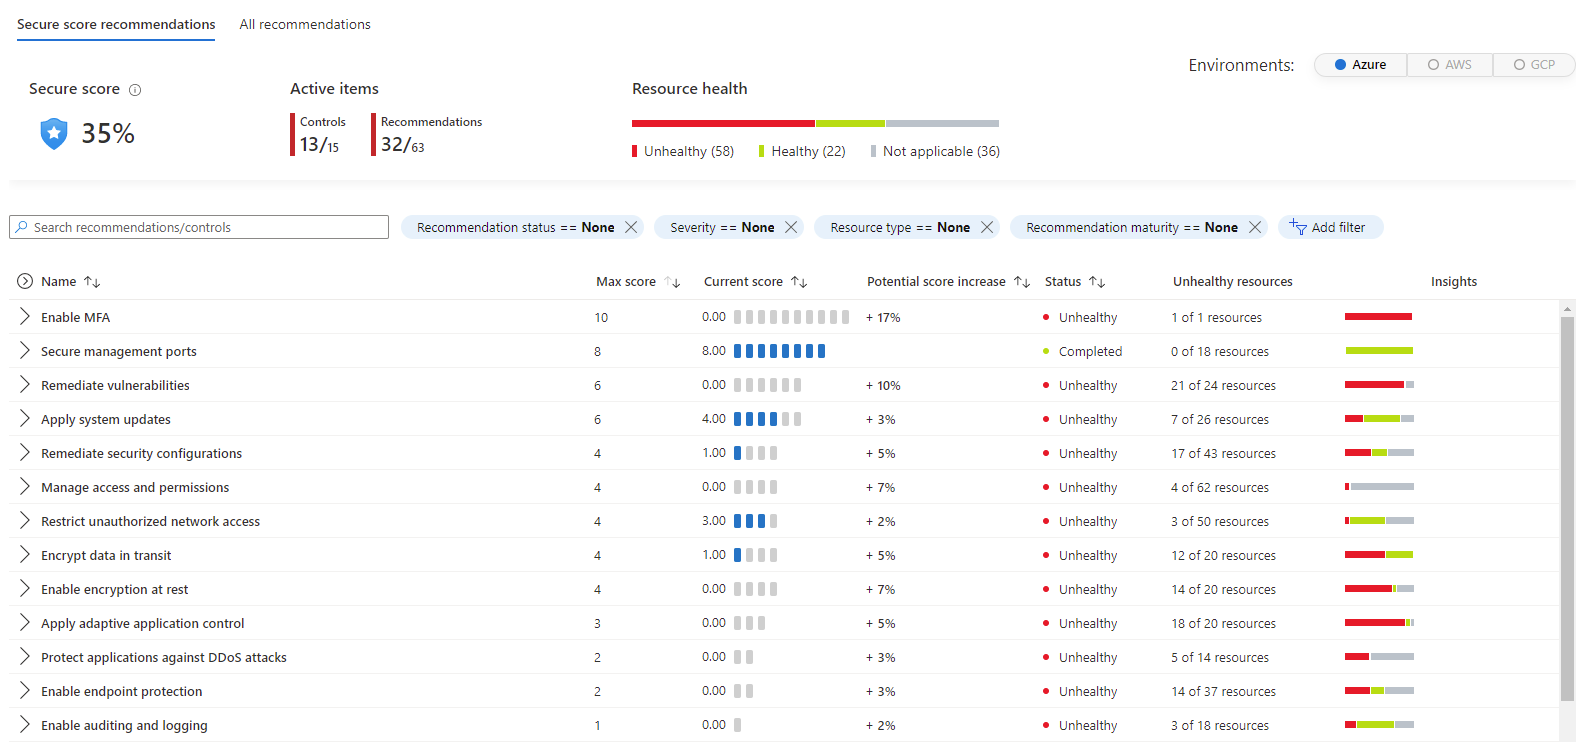 Screenshot showing the recommendations dashboard with all security controls organized in a top-down list, where the controls on top will have a higher impact on the secure score improvement.